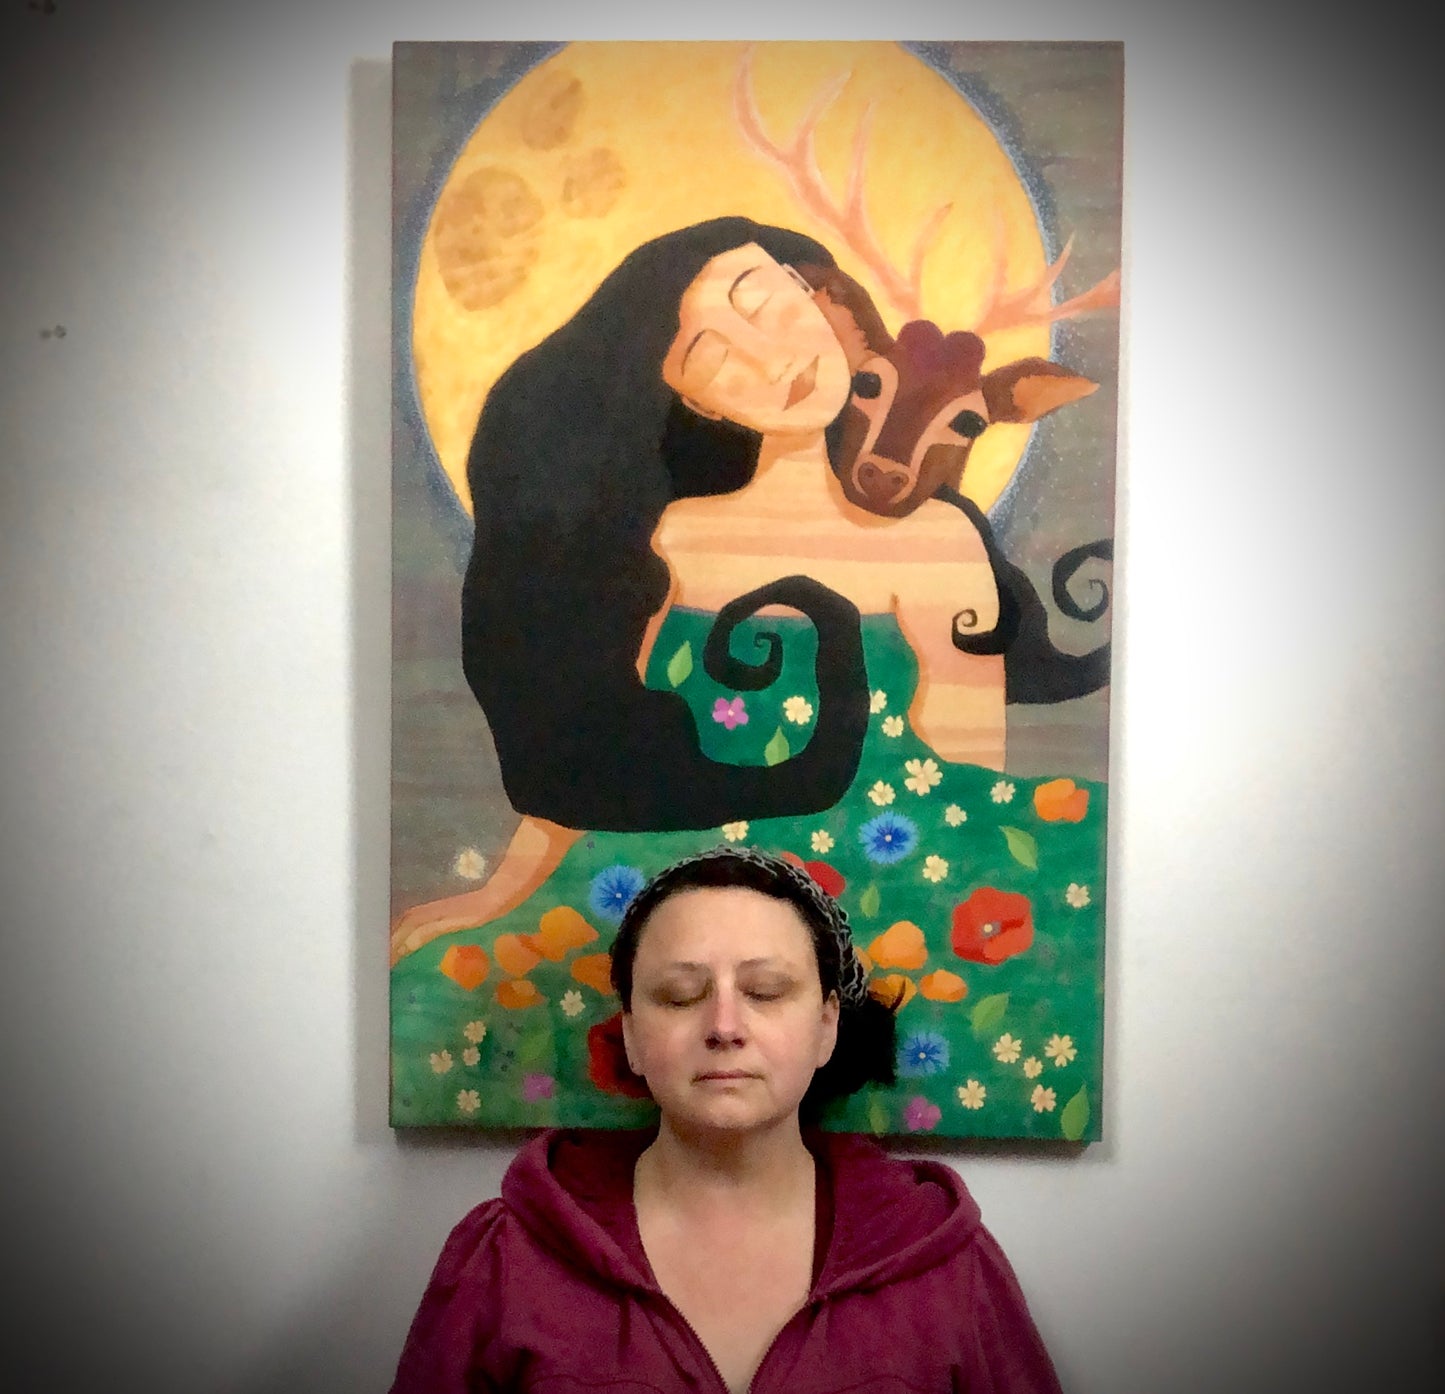 Portland artist Lea K. Tawd meditating in front of her painting "Guided."  The painting shows a beautiful woman with her eyes closed and a stag resting his head on her shoulder.